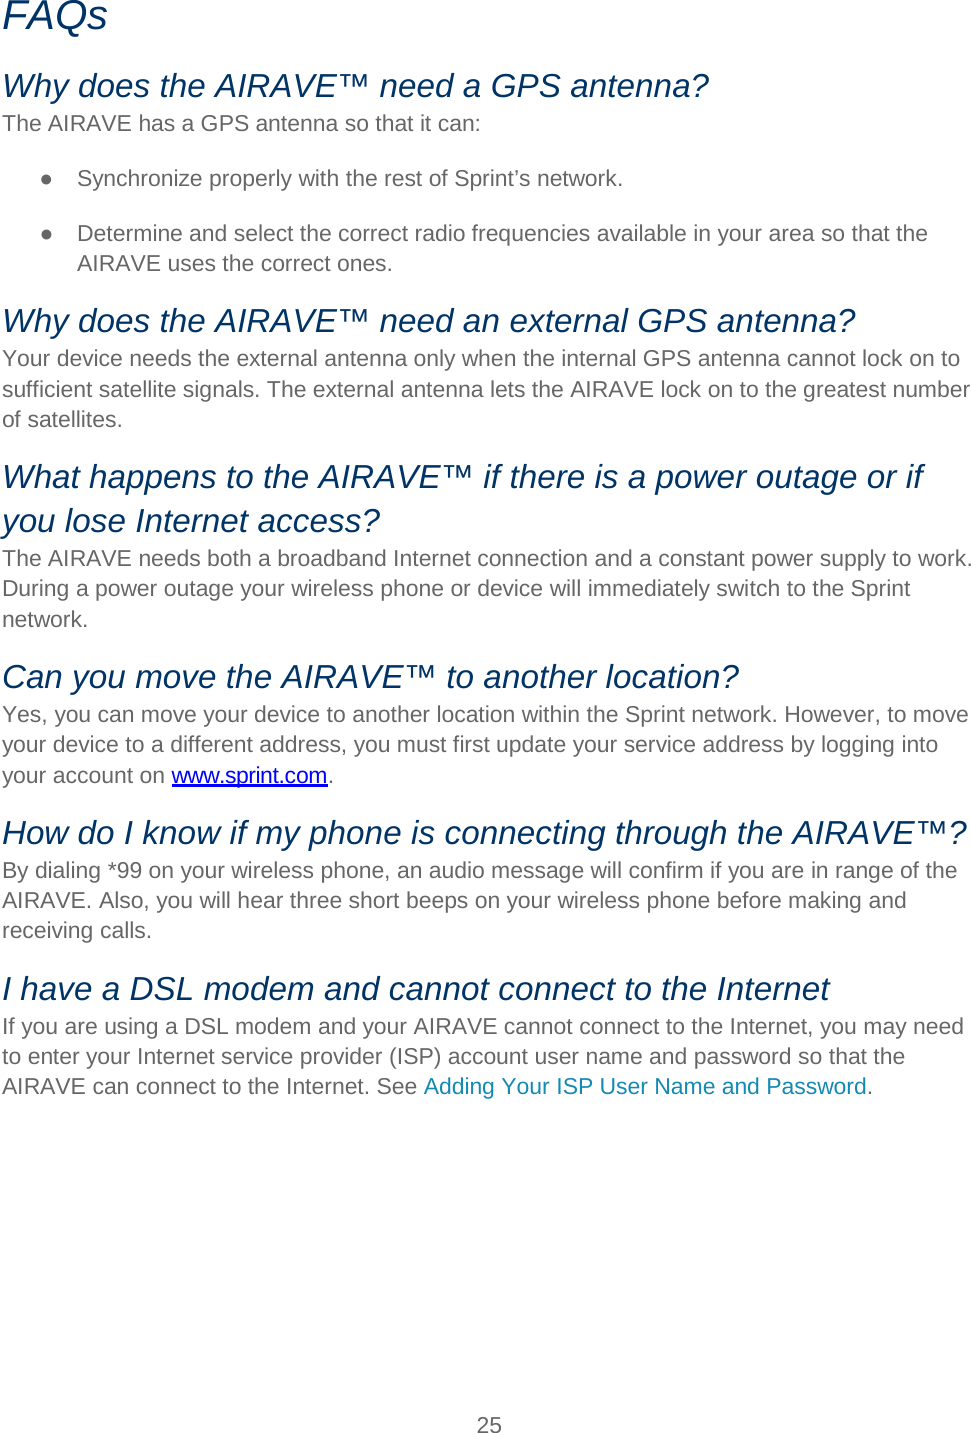   25   FAQs Why does the AIRAVE™ need a GPS antenna? The AIRAVE has a GPS antenna so that it can: ● Synchronize properly with the rest of Sprint’s network.  ● Determine and select the correct radio frequencies available in your area so that the AIRAVE uses the correct ones.  Why does the AIRAVE™ need an external GPS antenna? Your device needs the external antenna only when the internal GPS antenna cannot lock on to sufficient satellite signals. The external antenna lets the AIRAVE lock on to the greatest number of satellites. What happens to the AIRAVE™ if there is a power outage or if you lose Internet access? The AIRAVE needs both a broadband Internet connection and a constant power supply to work. During a power outage your wireless phone or device will immediately switch to the Sprint network.  Can you move the AIRAVE™ to another location? Yes, you can move your device to another location within the Sprint network. However, to move your device to a different address, you must first update your service address by logging into your account on www.sprint.com.  How do I know if my phone is connecting through the AIRAVE™? By dialing *99 on your wireless phone, an audio message will confirm if you are in range of the AIRAVE. Also, you will hear three short beeps on your wireless phone before making and receiving calls. I have a DSL modem and cannot connect to the Internet If you are using a DSL modem and your AIRAVE cannot connect to the Internet, you may need to enter your Internet service provider (ISP) account user name and password so that the AIRAVE can connect to the Internet. See Adding Your ISP User Name and Password.     